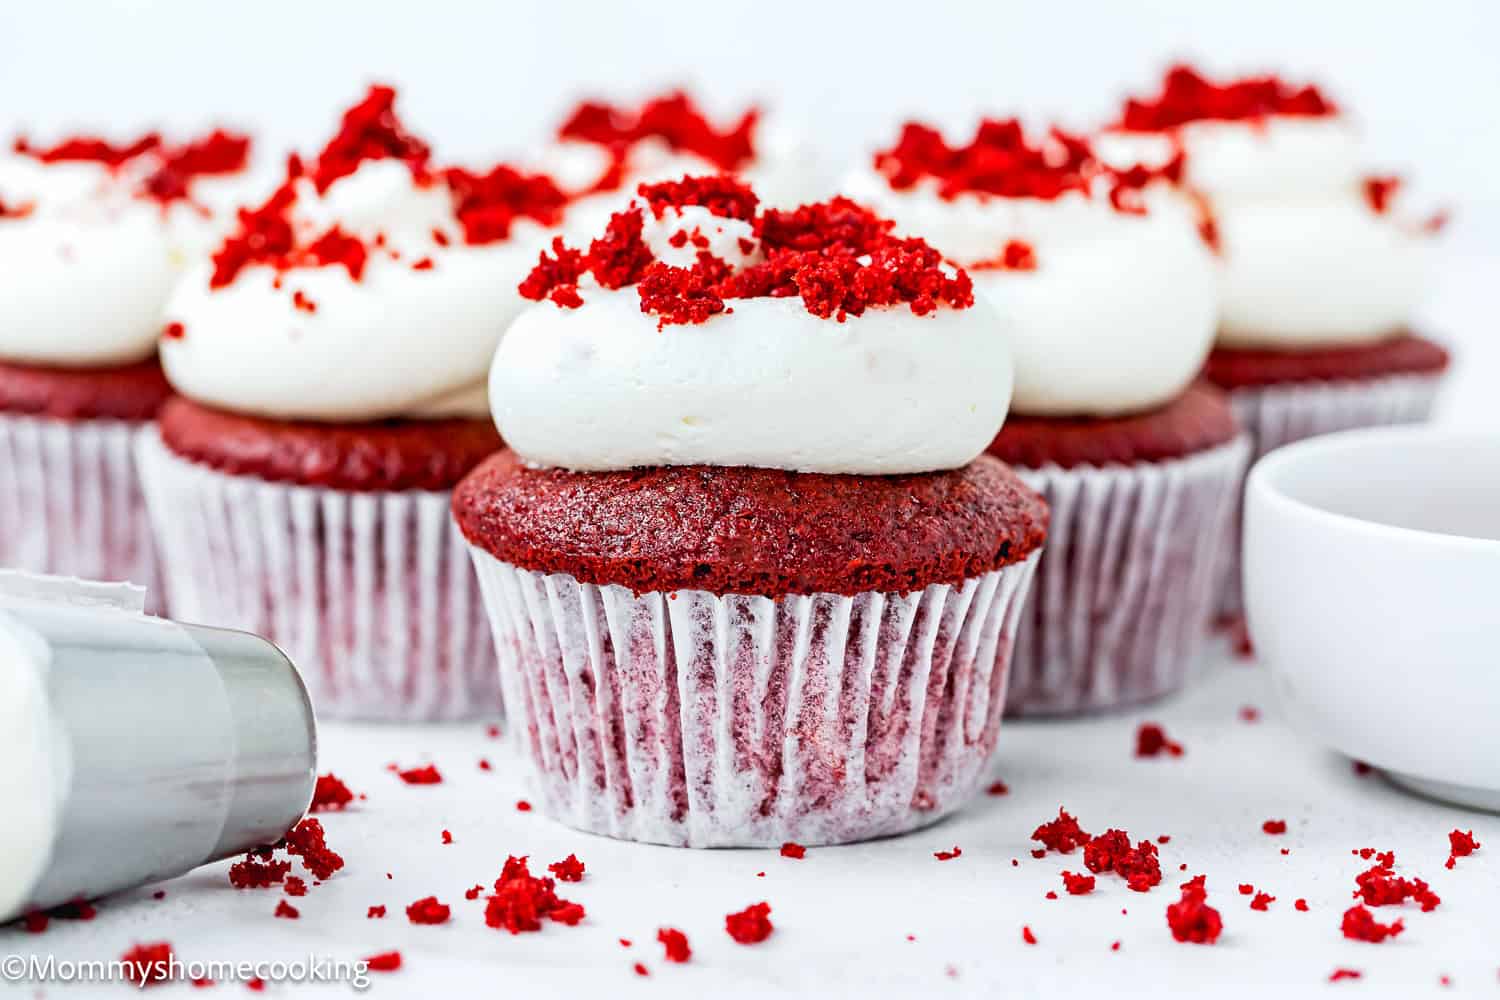 Vegan Red Velvet Cupcakes with frosting and red velvet crumbs on top.